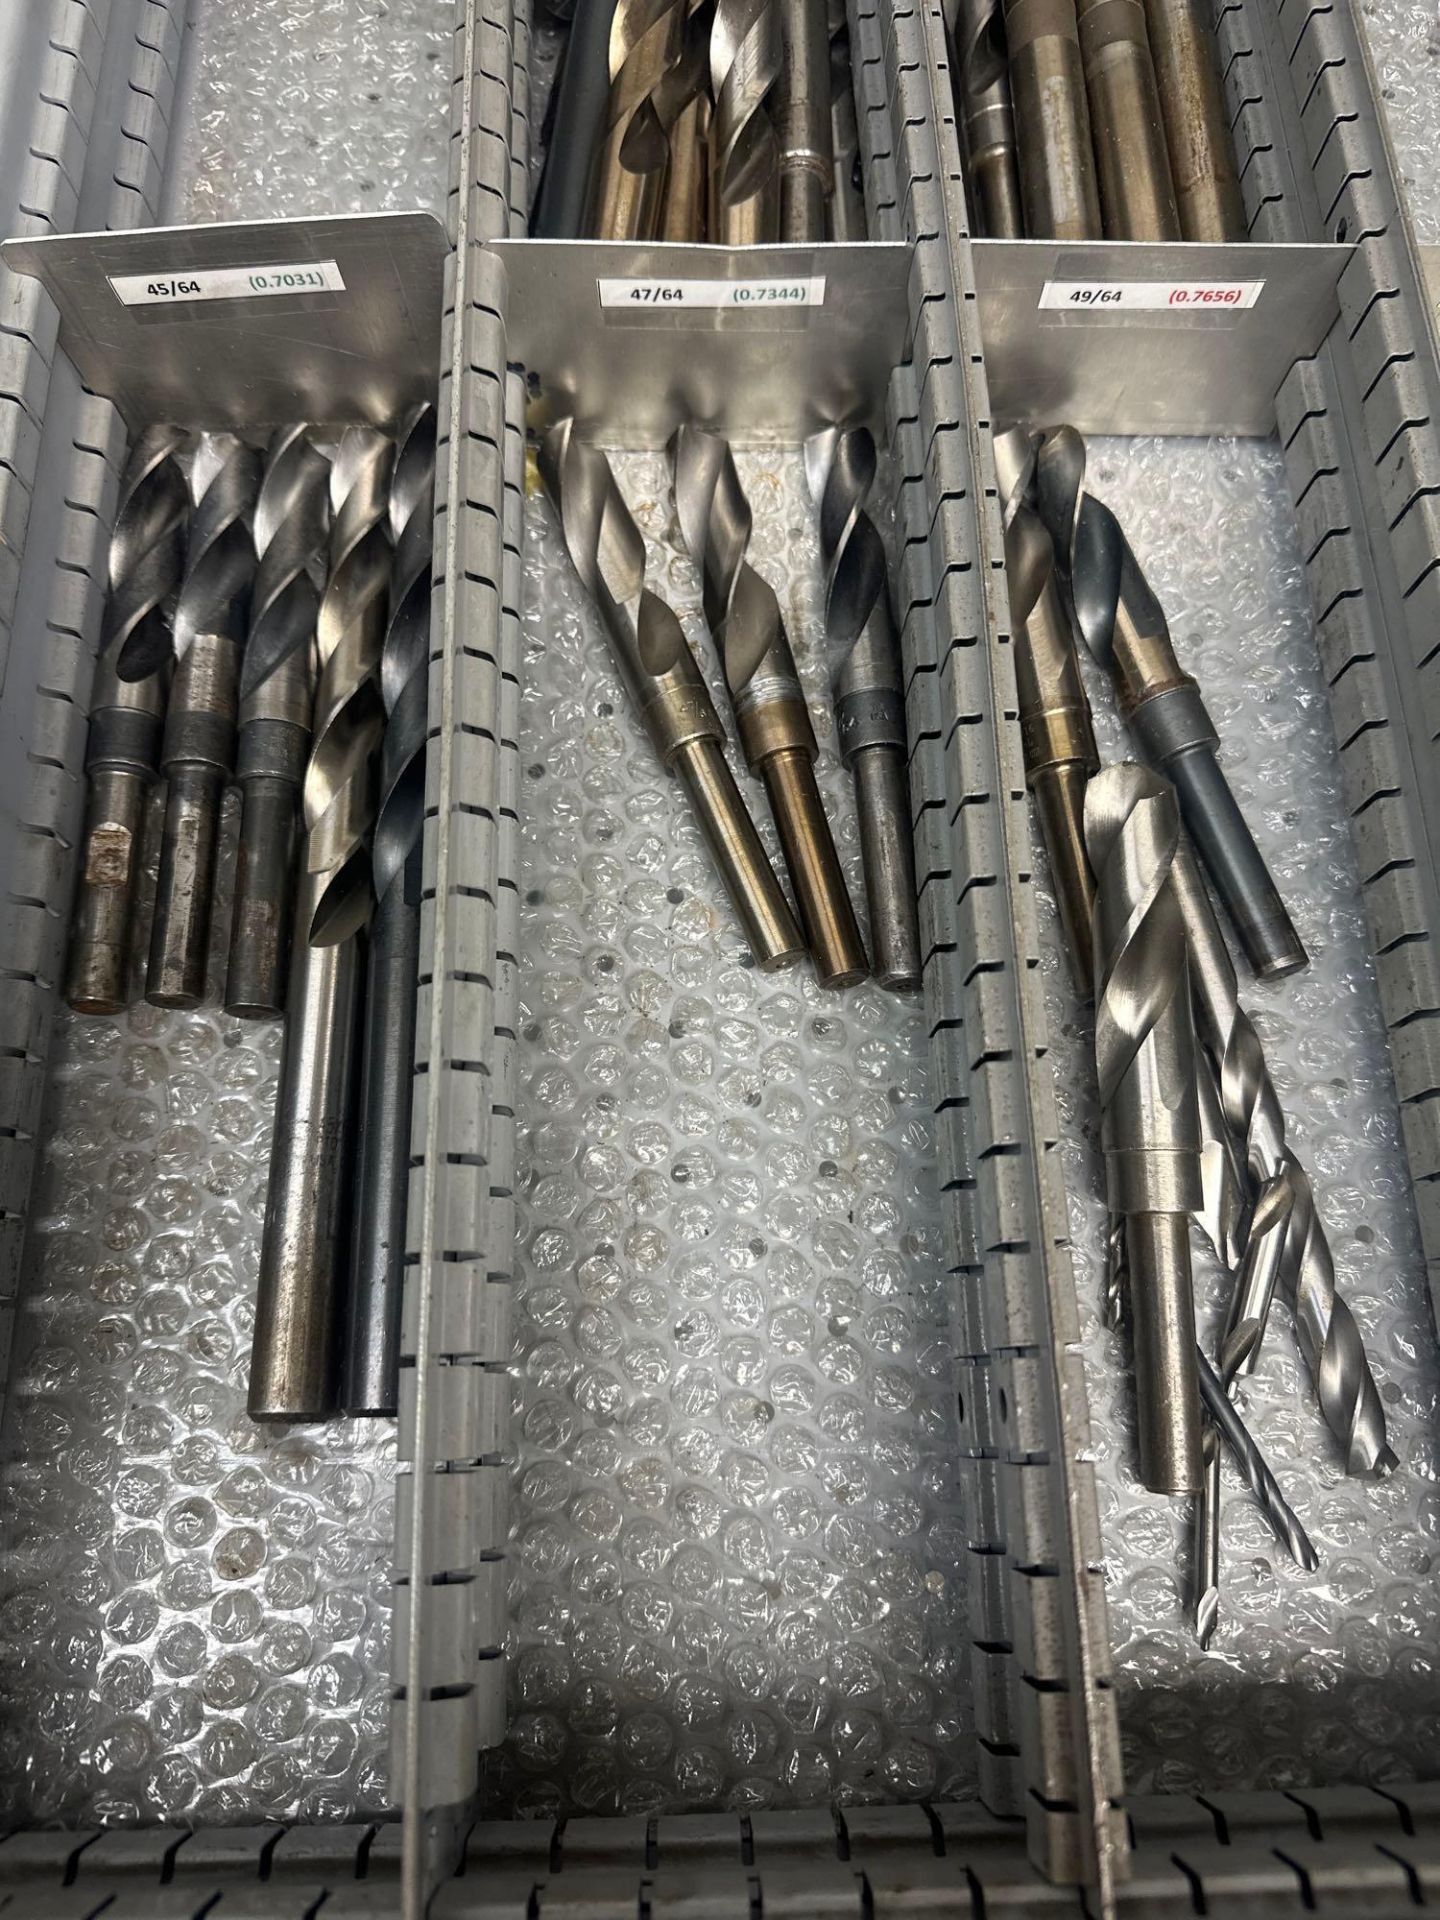 Drawer with Assorted Drills - Image 2 of 5